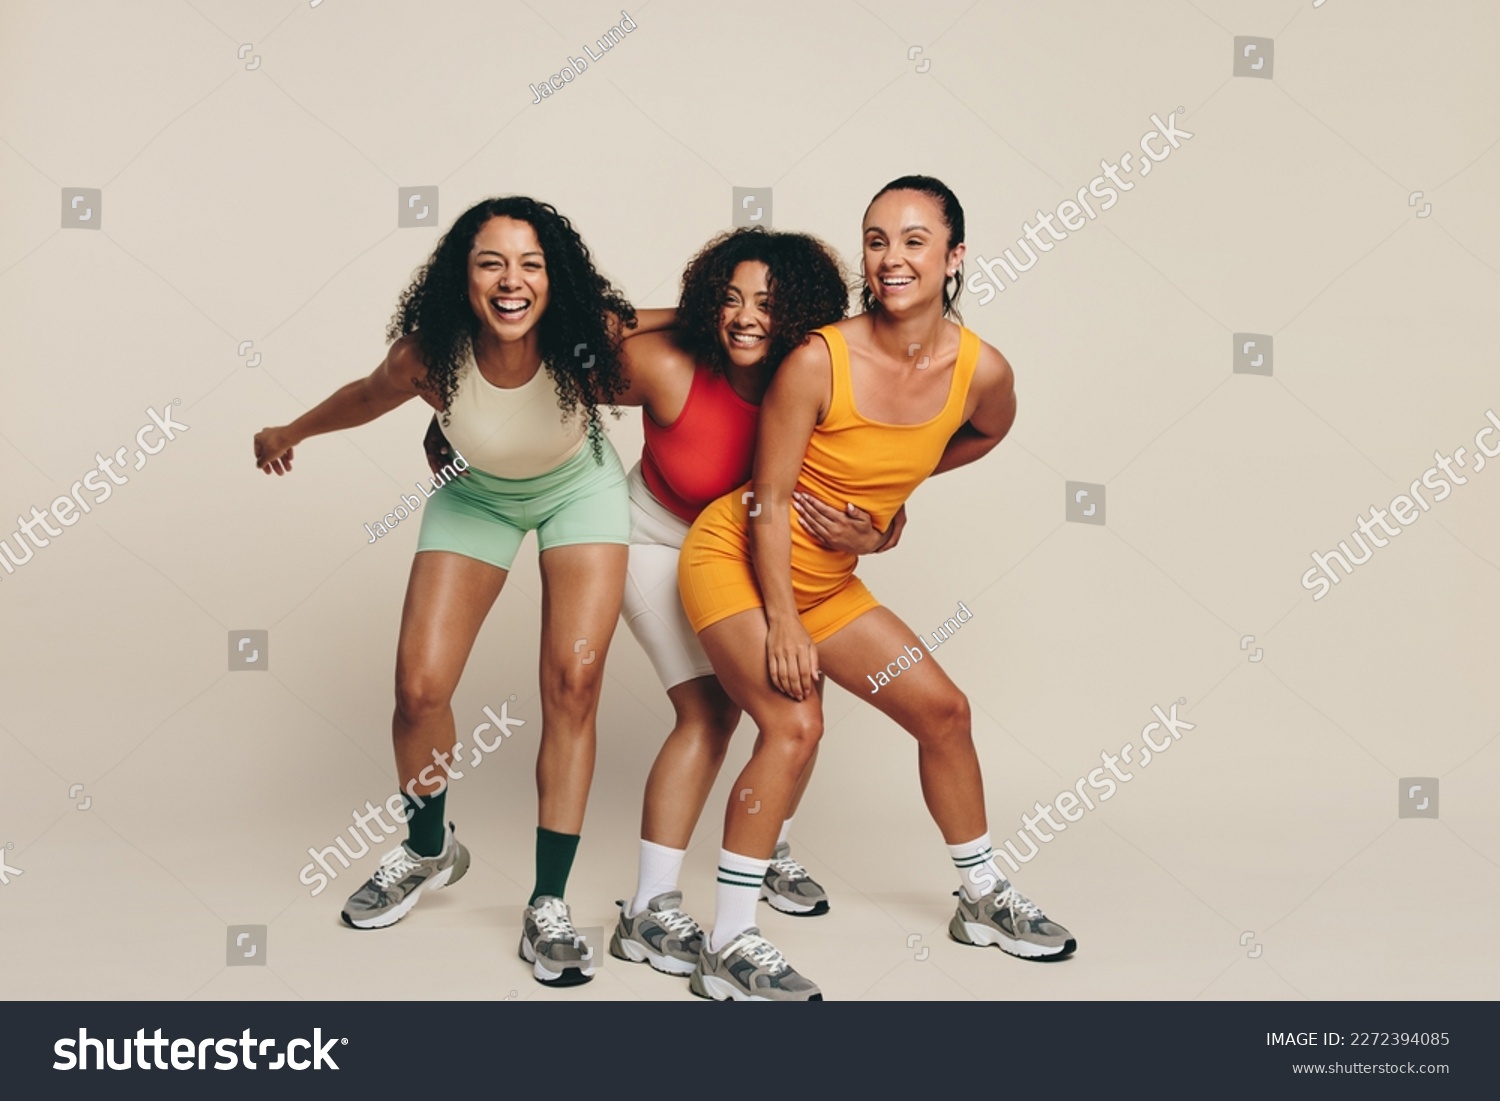 Group of young female athletes laughing and having fun in fitness clothing, celebrating their love for sport and exercise. Happy young sportswomen demonstrating their commitment to a healthy lifestyle #2272394085